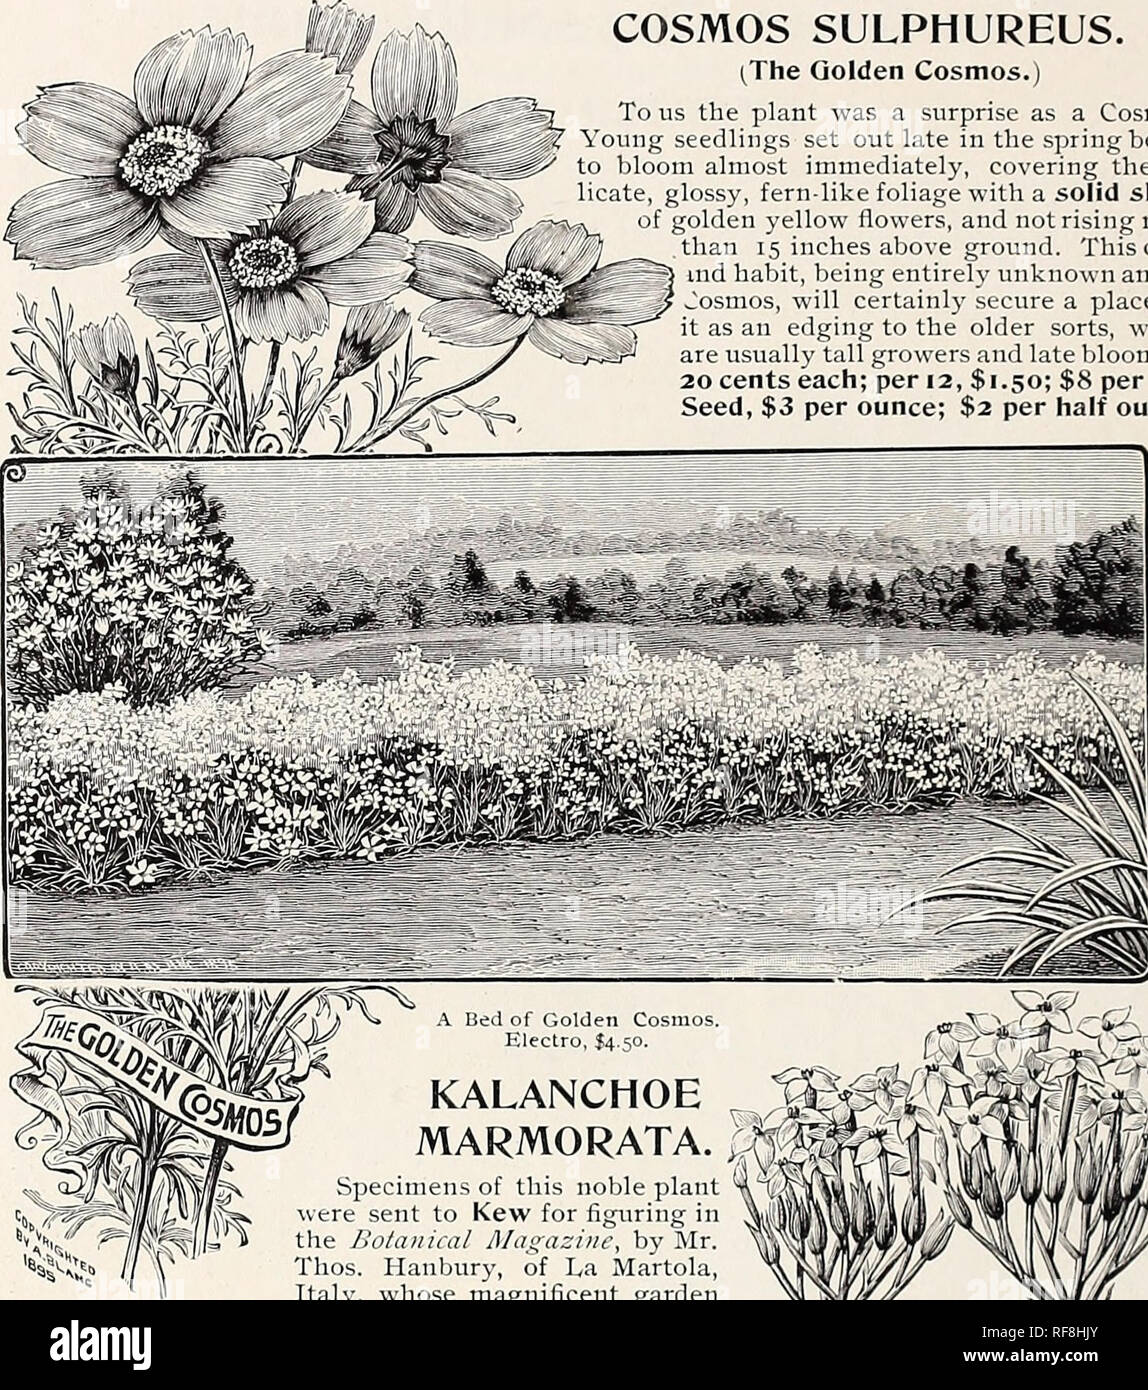 . Catalogue of novelties and specialites : plants bulbs fruits. Nursery stock, Pennsylvania, Philadelphia, Catalogs; Plants, Ornamental, Catalogs; Flowers, Catalogs; Fruit, Catalogs; Nursery stock; Plants, Ornamental; Flowers; Fruit. COSMOS SULPHUREUS. ^The Golden Cosmos. i=7 To us the plant was a surprise as a Cosmos. 7 Young seedlings set out late in the spring began -•• y to bloom almost immediately, covering the de- licate, glossy, fern-like foliage with a solid sheet ^ -- of golden yellow flowers, and not rising more / . pj .than 15 inches above ground. This color jga^pT^3^ ind habit,  Stock Photo